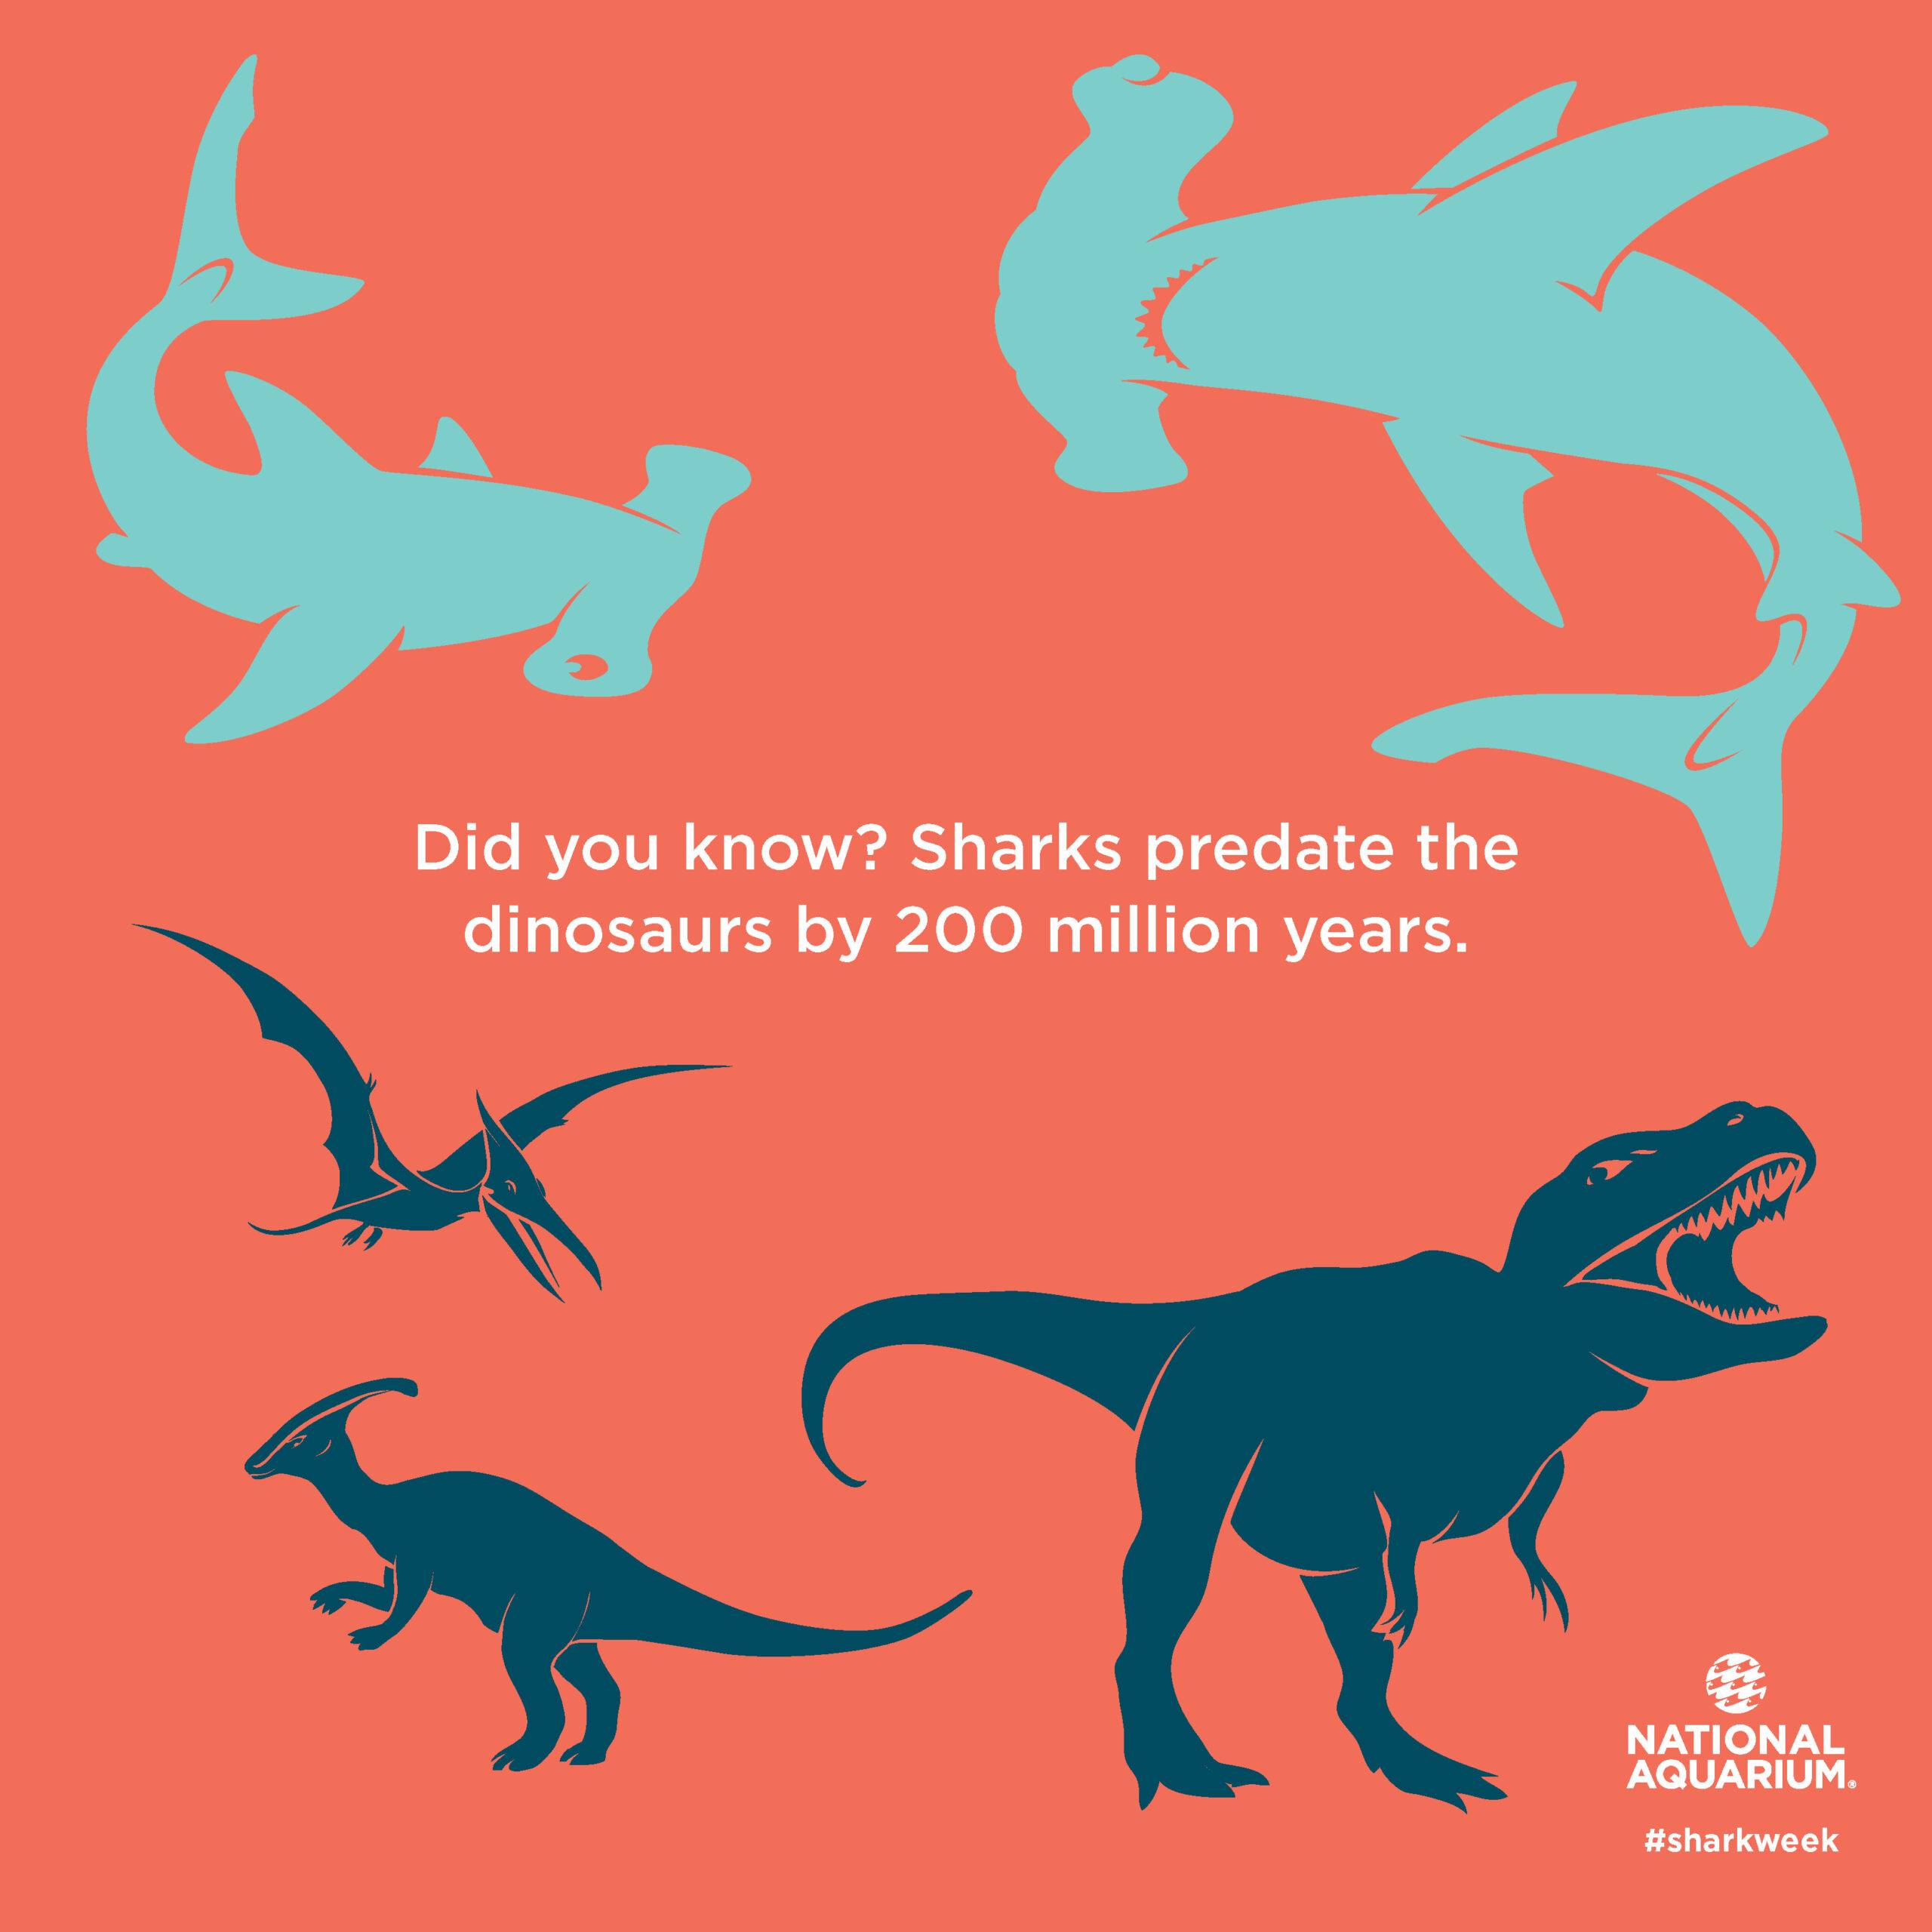 Did you know sharks predate the dinosaurs by 200 million years?.